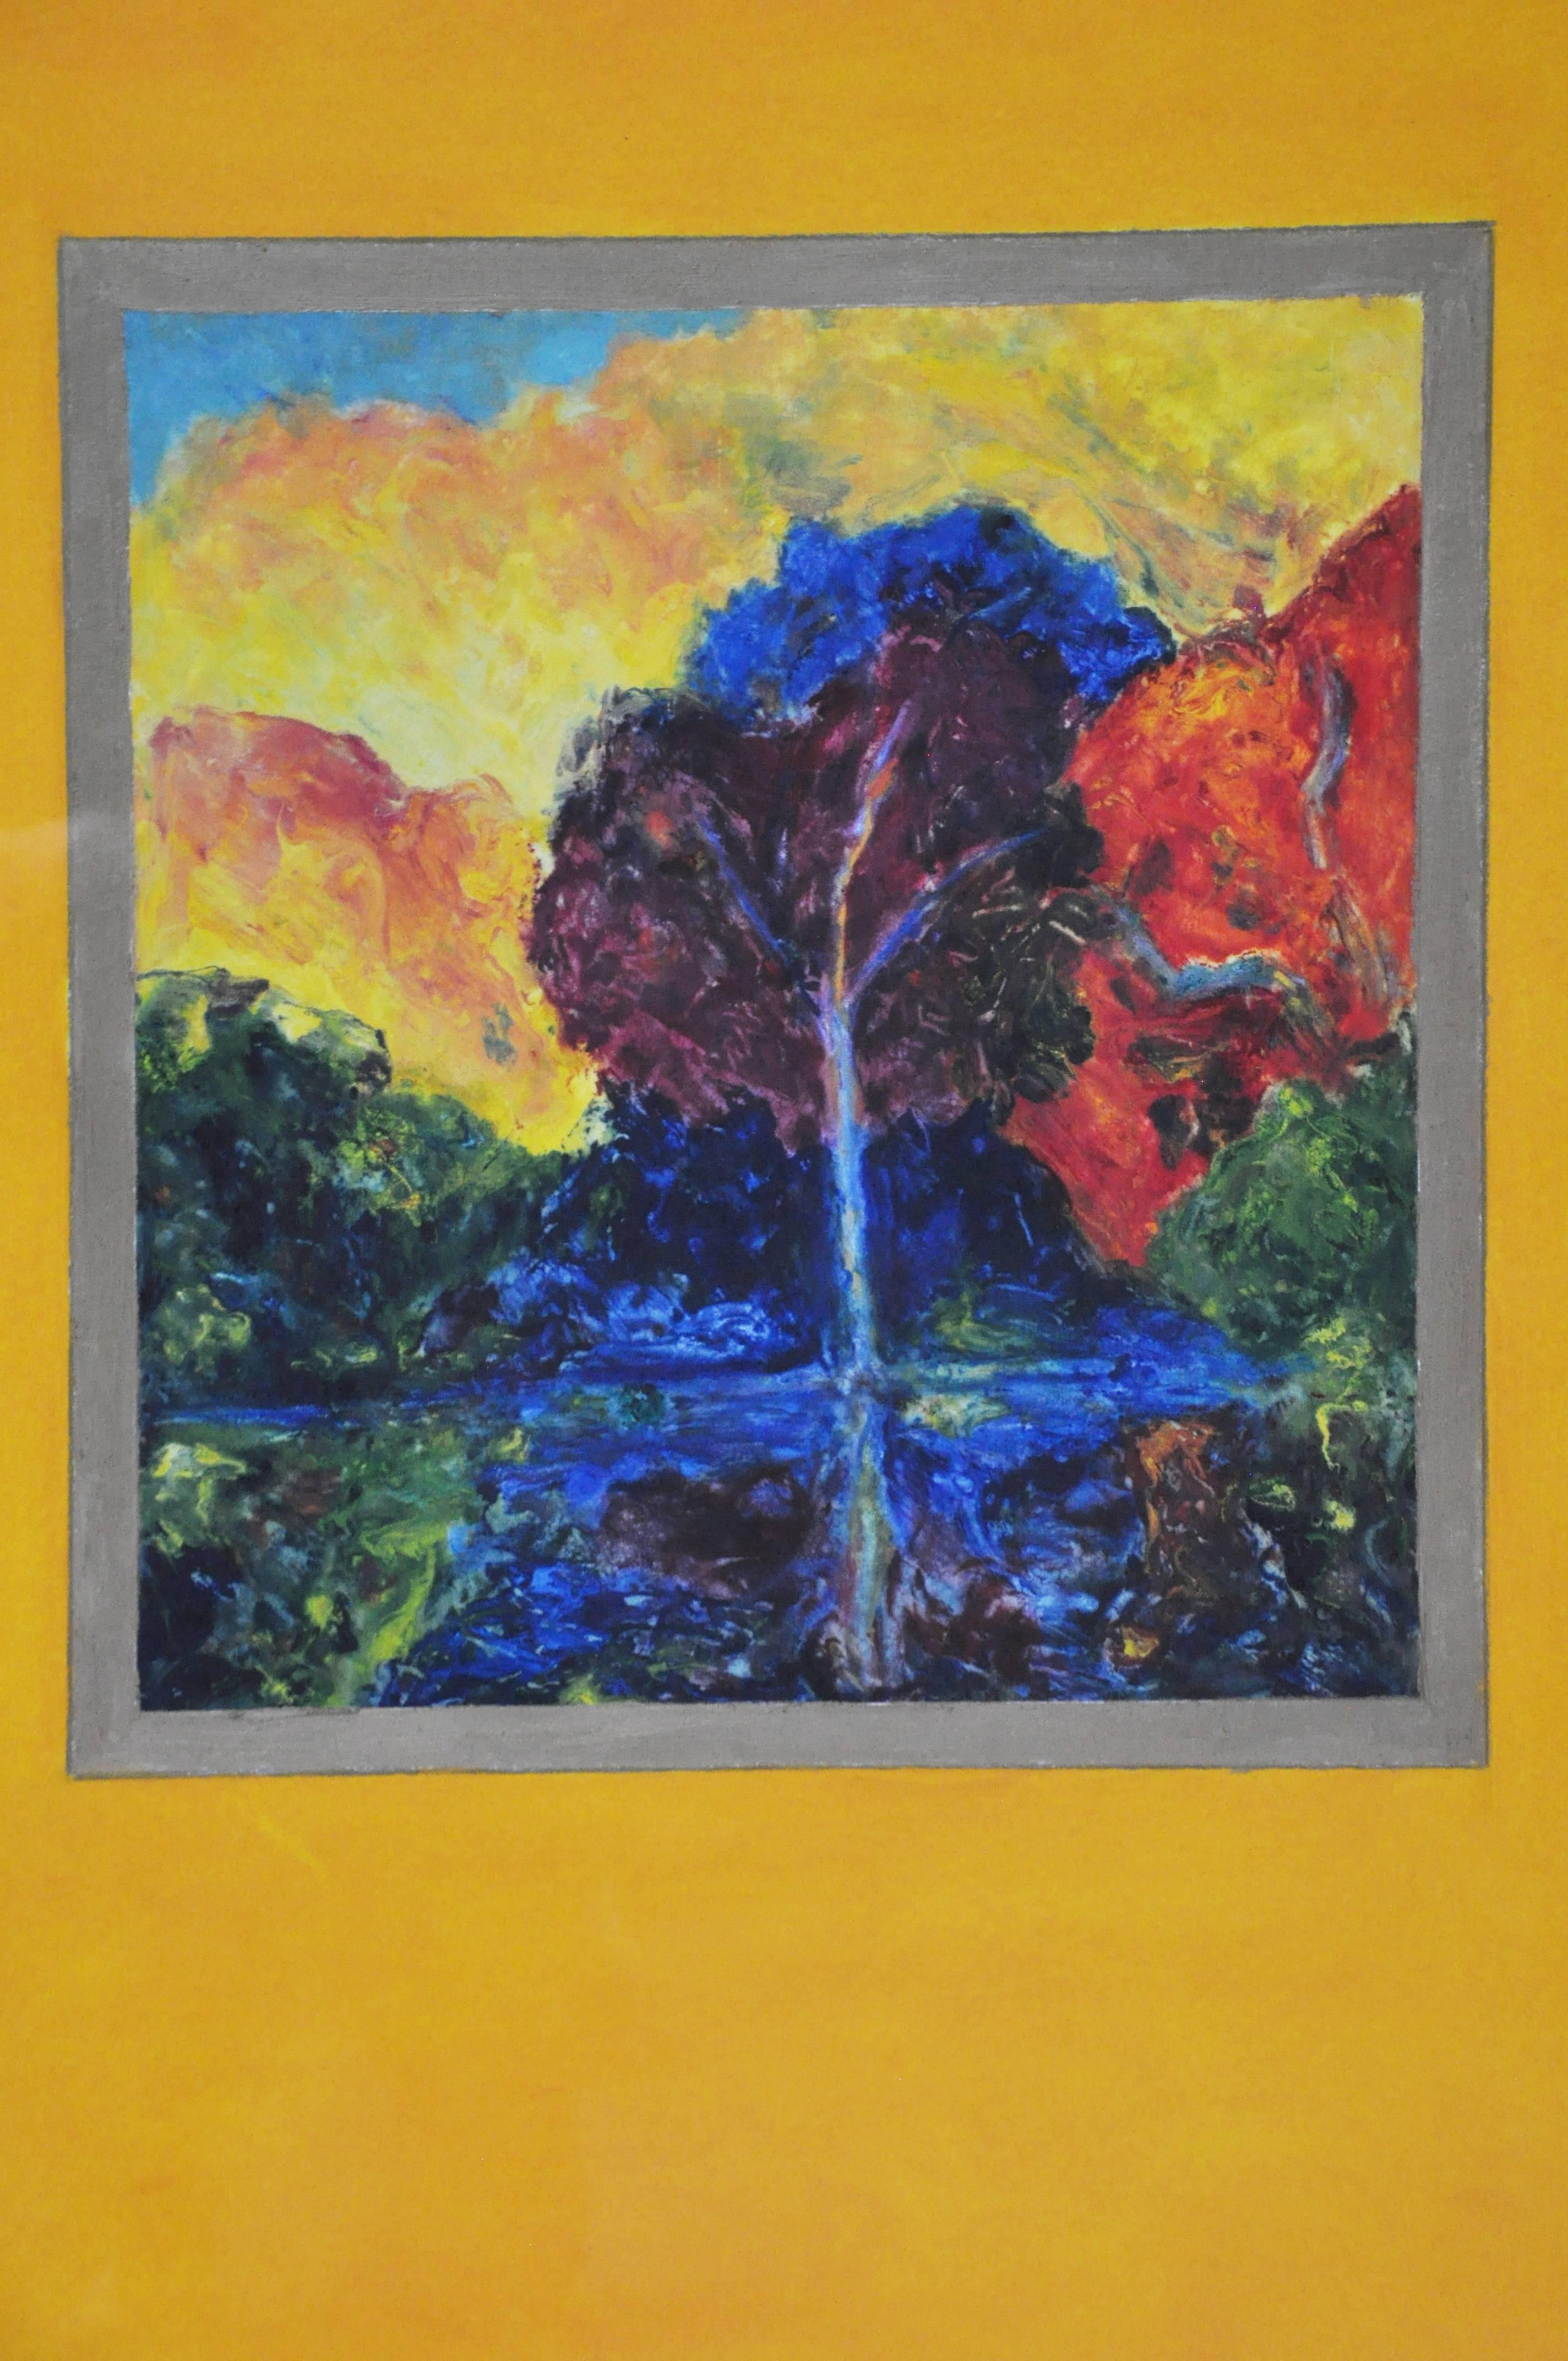 Beautiful print matted and framed in gold. This is a monotype artwork in oranges and blues signed by Barbara Young. This is a vibrant monotype print. Barbara Young graduated from the University of Cincinnati with a B.S in Design. She later studied